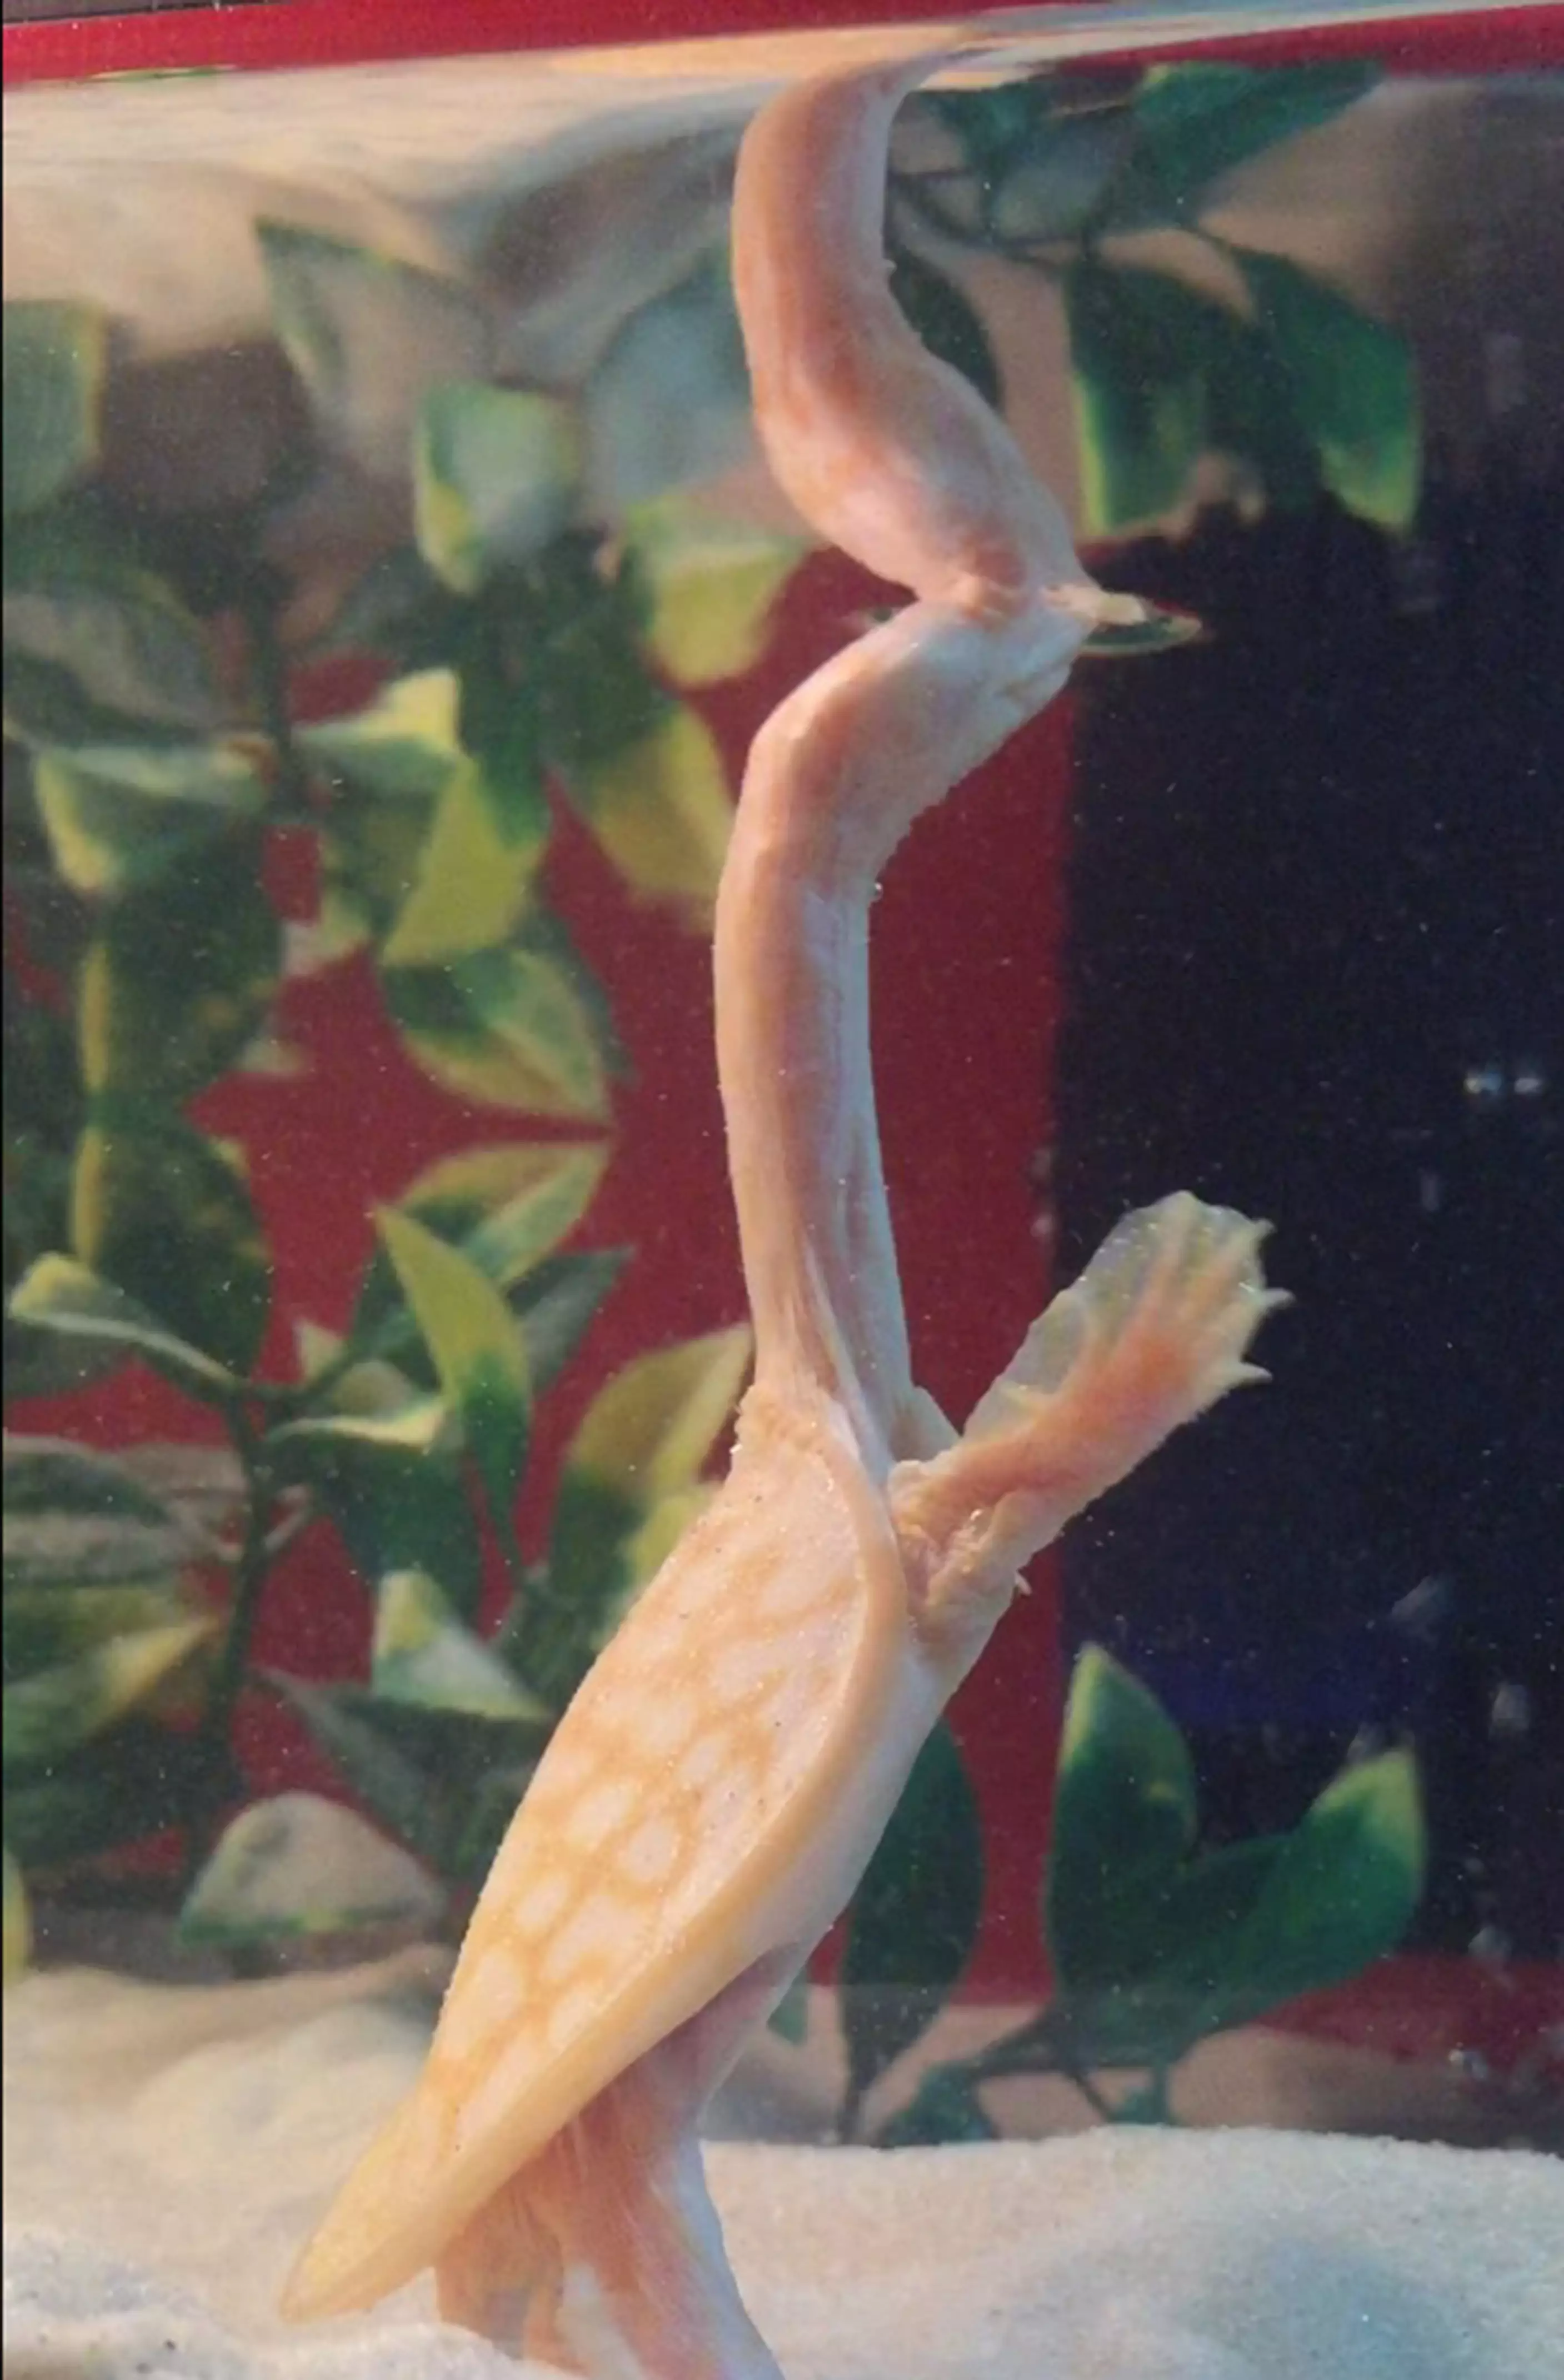 She is rare because she is albino but also her long neck. (